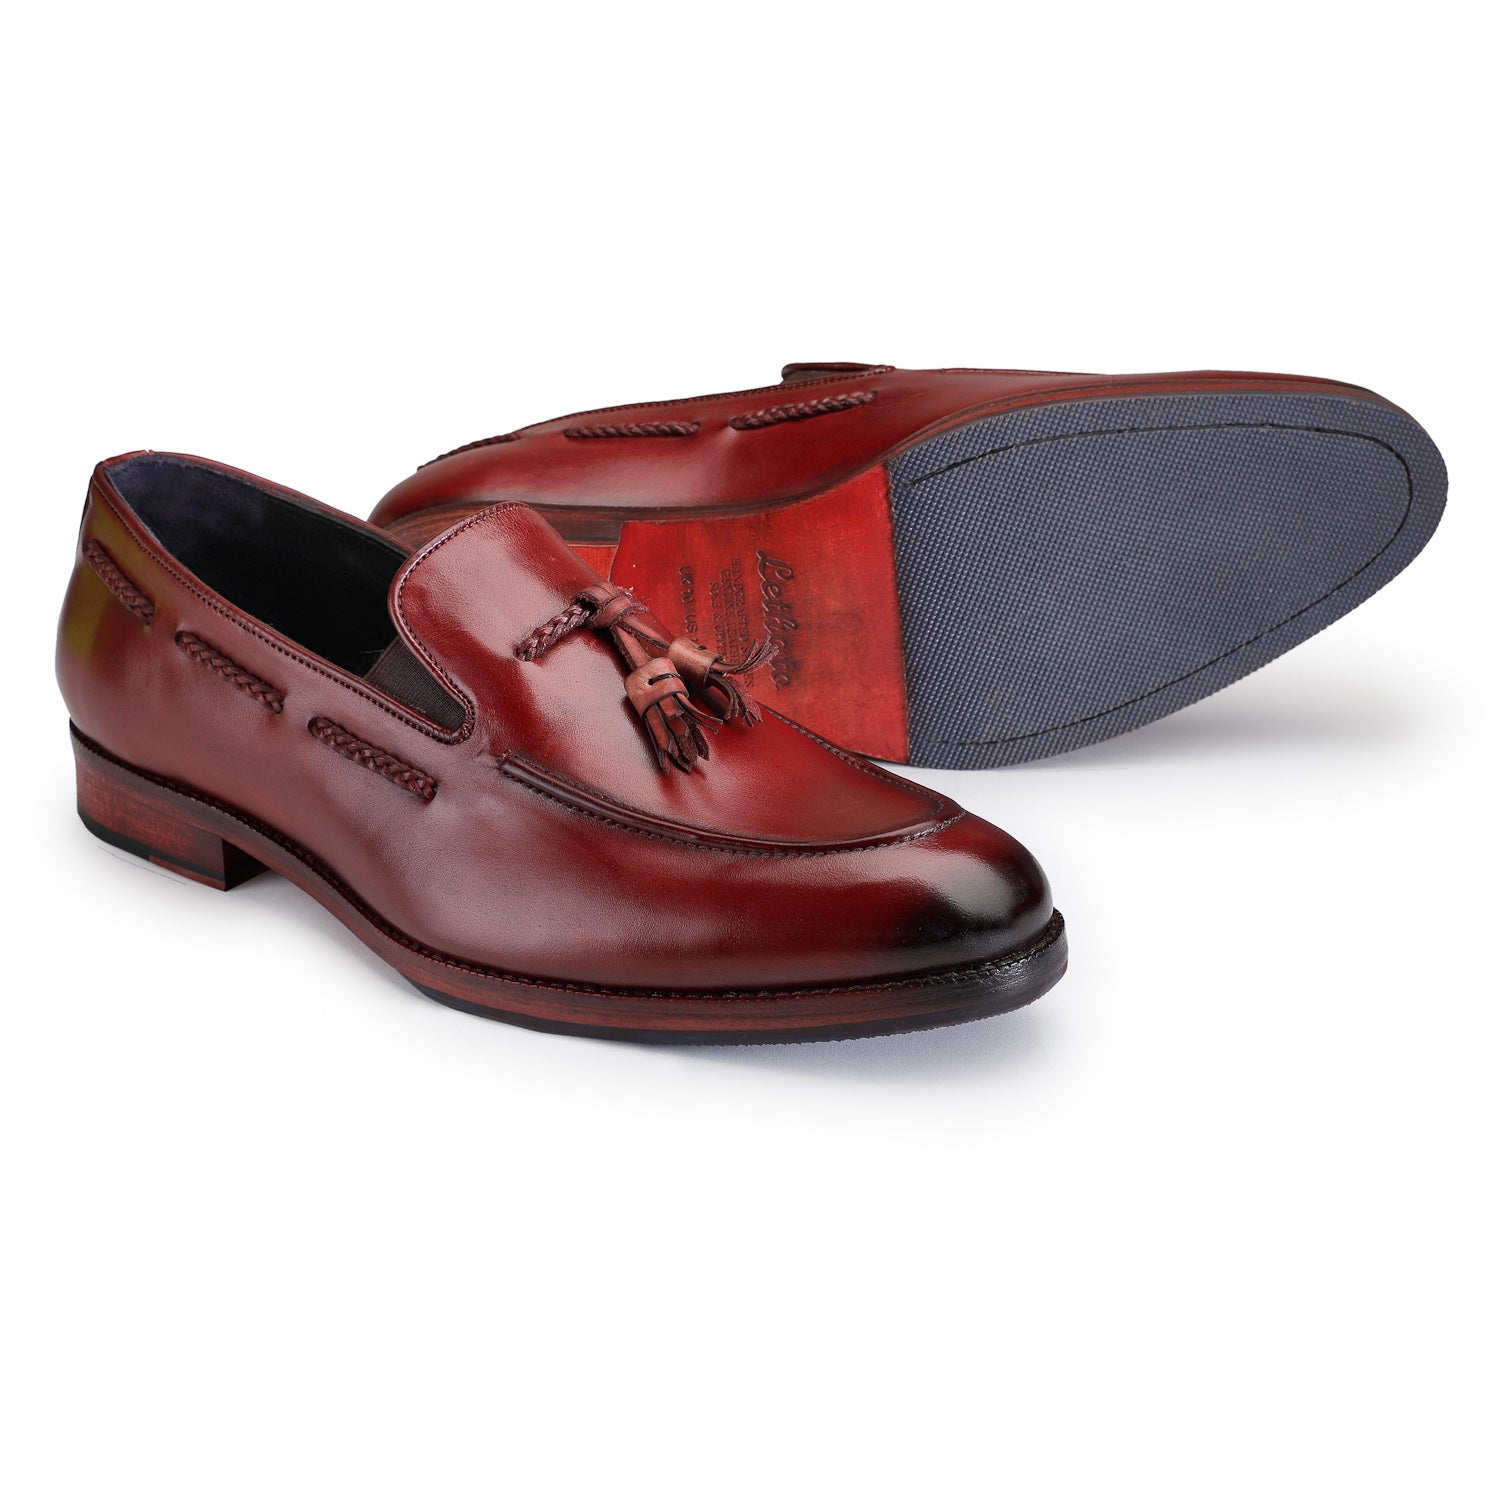 Il lussone 2 - Red Bottom Tassel Italian Style Loafers for Men AshourShoes Rossi Ashour Shoes Brown / 44